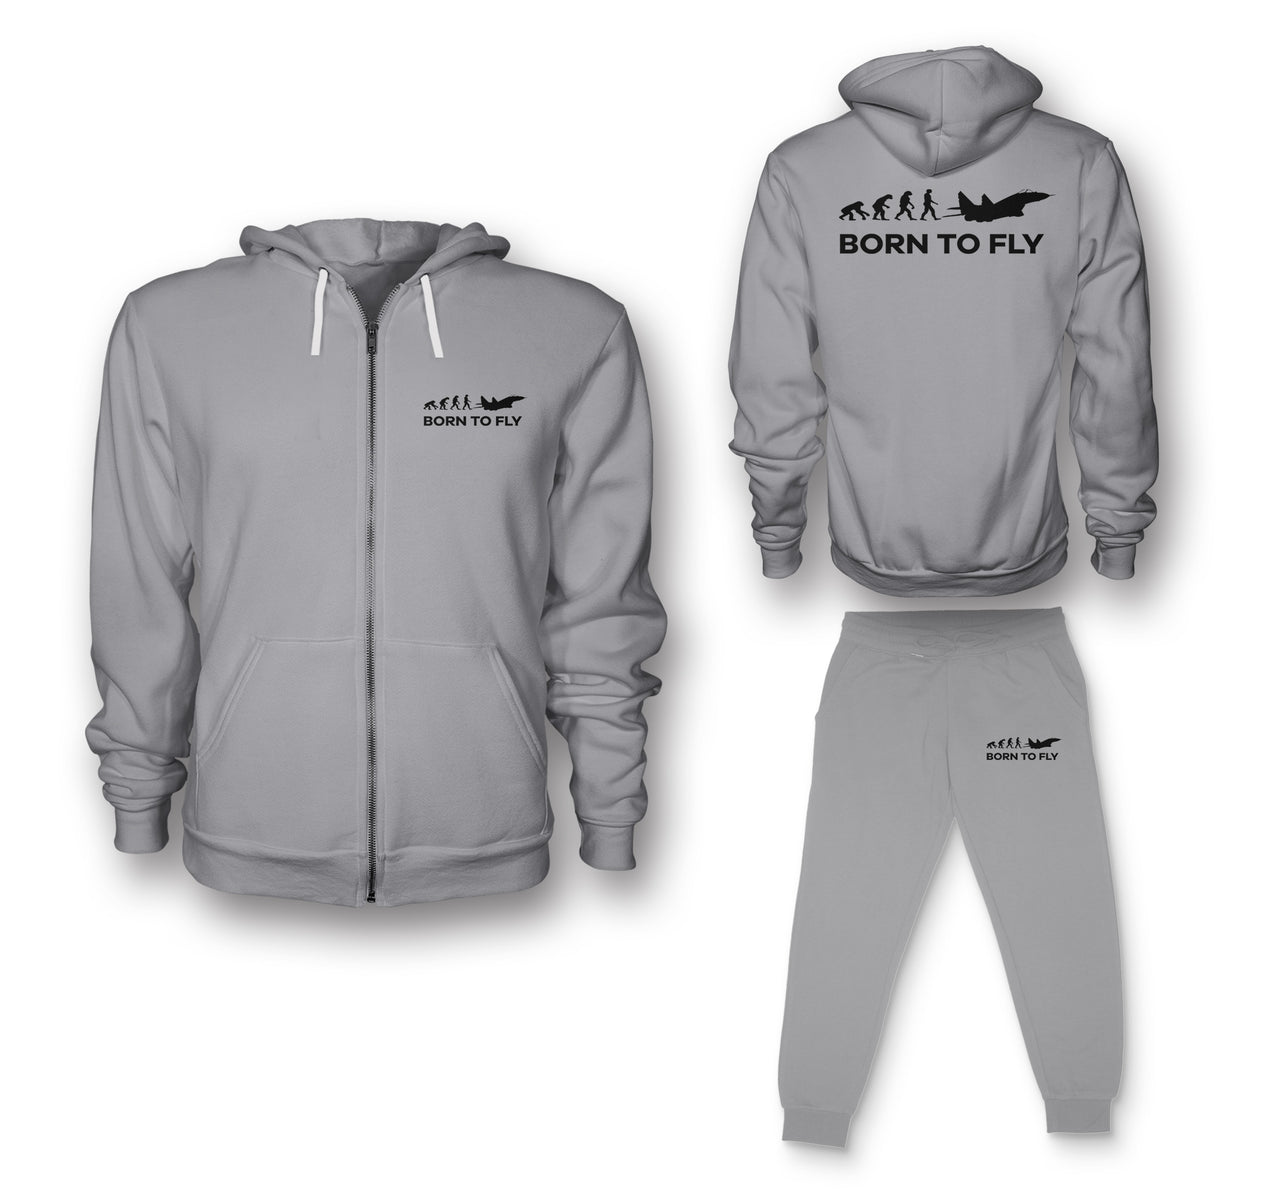 Born To Fly Military Designed Zipped Hoodies & Sweatpants Set